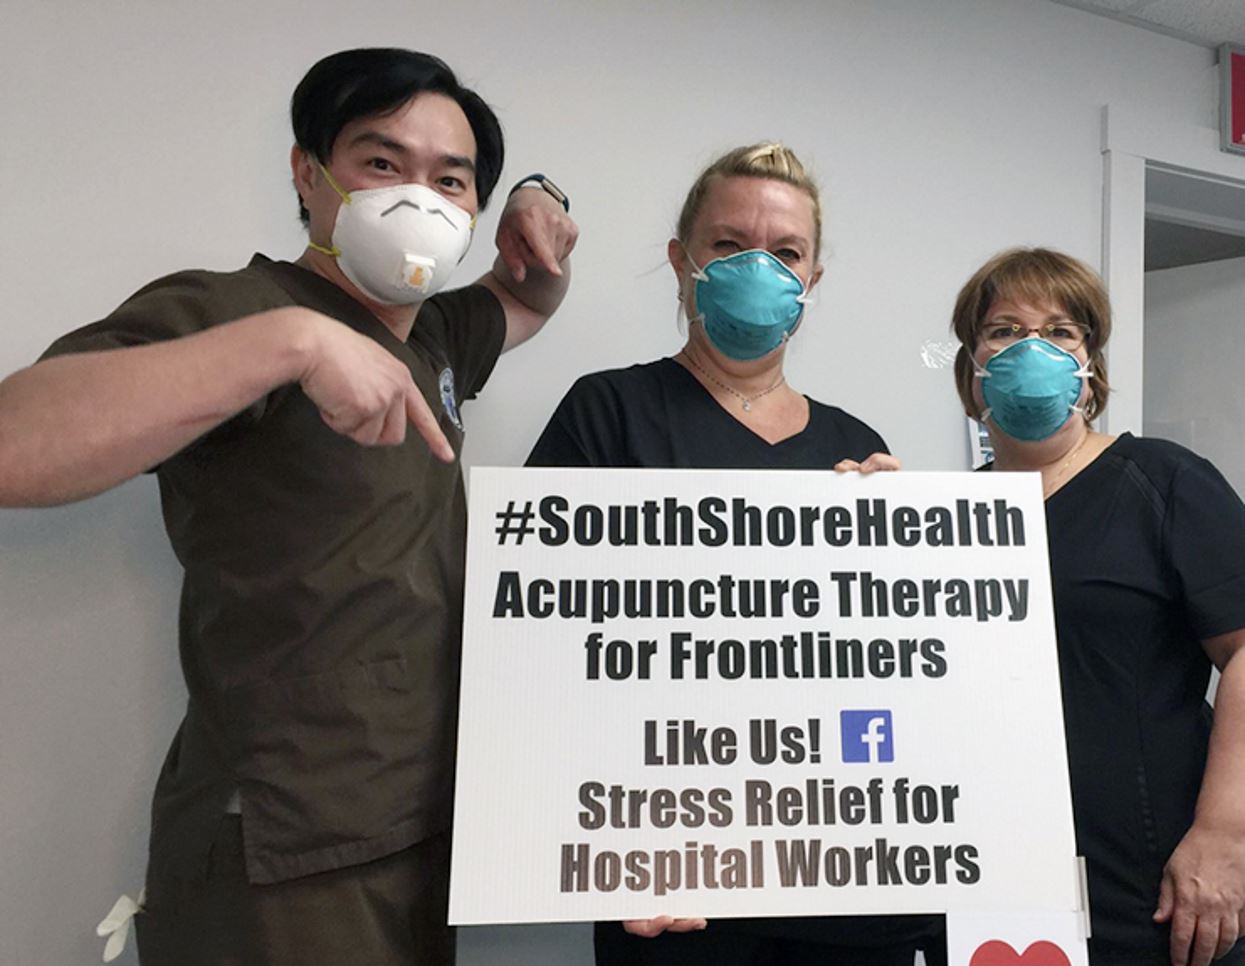 three people by a sign that says #SouthShoreHealth Acupuncture Therapy for Frontliners Like Us! Stress Relief for Hospital Workers